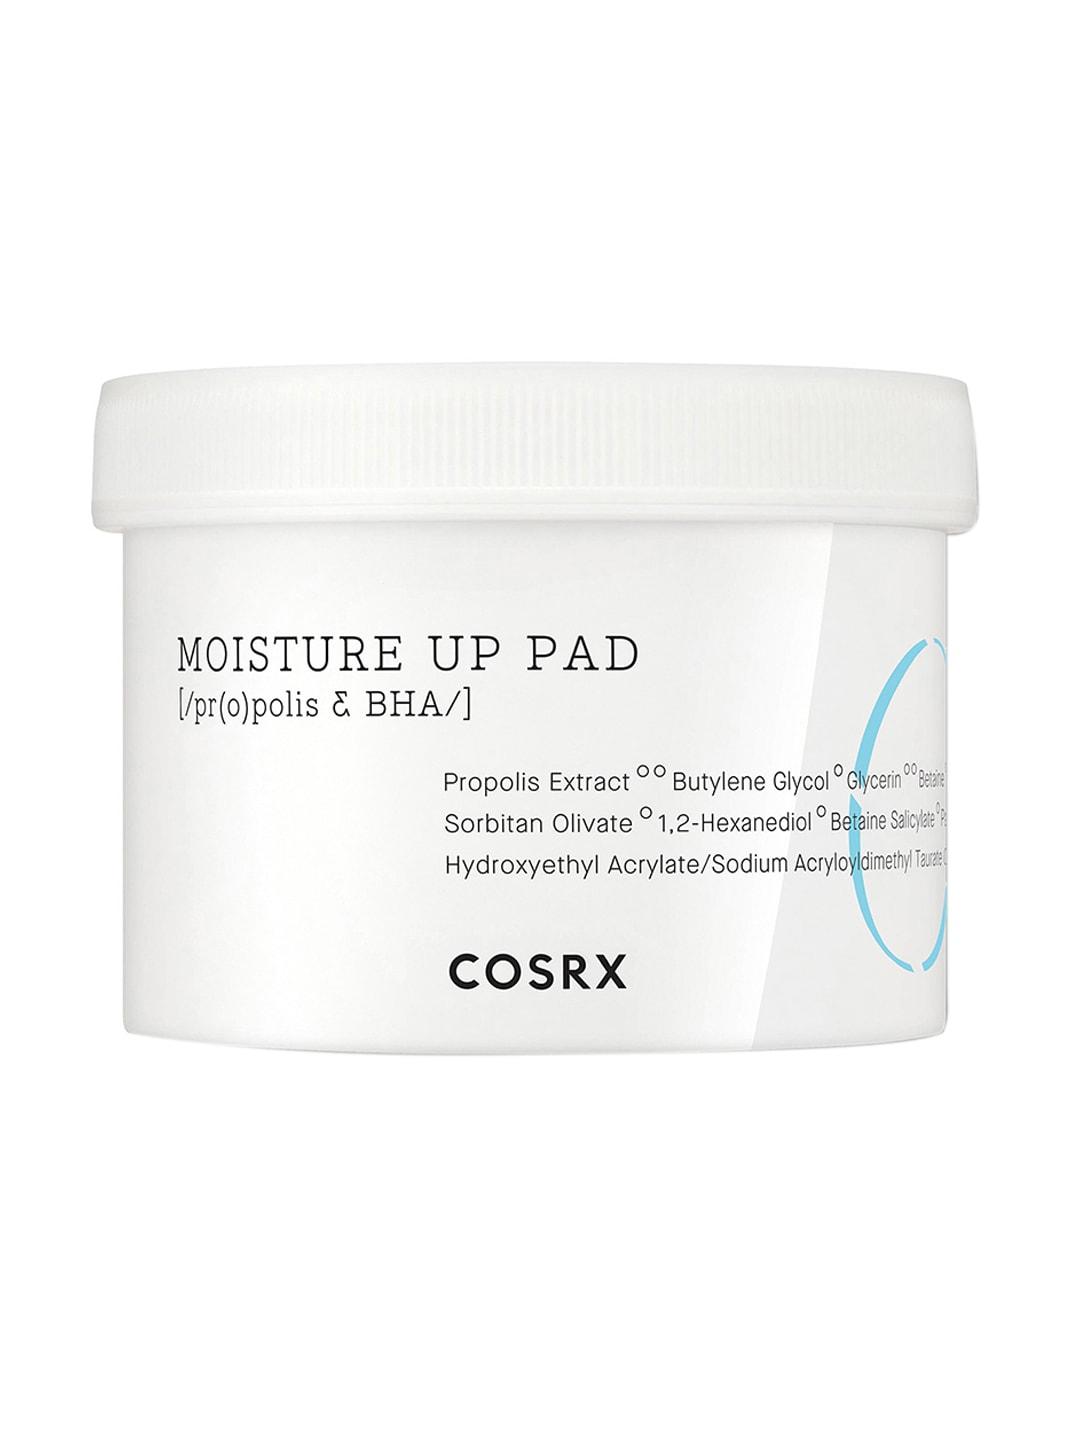 COSRX One Step Moisture Up Pad - 70 Pads with Natural BHA for Acne & Moisturising